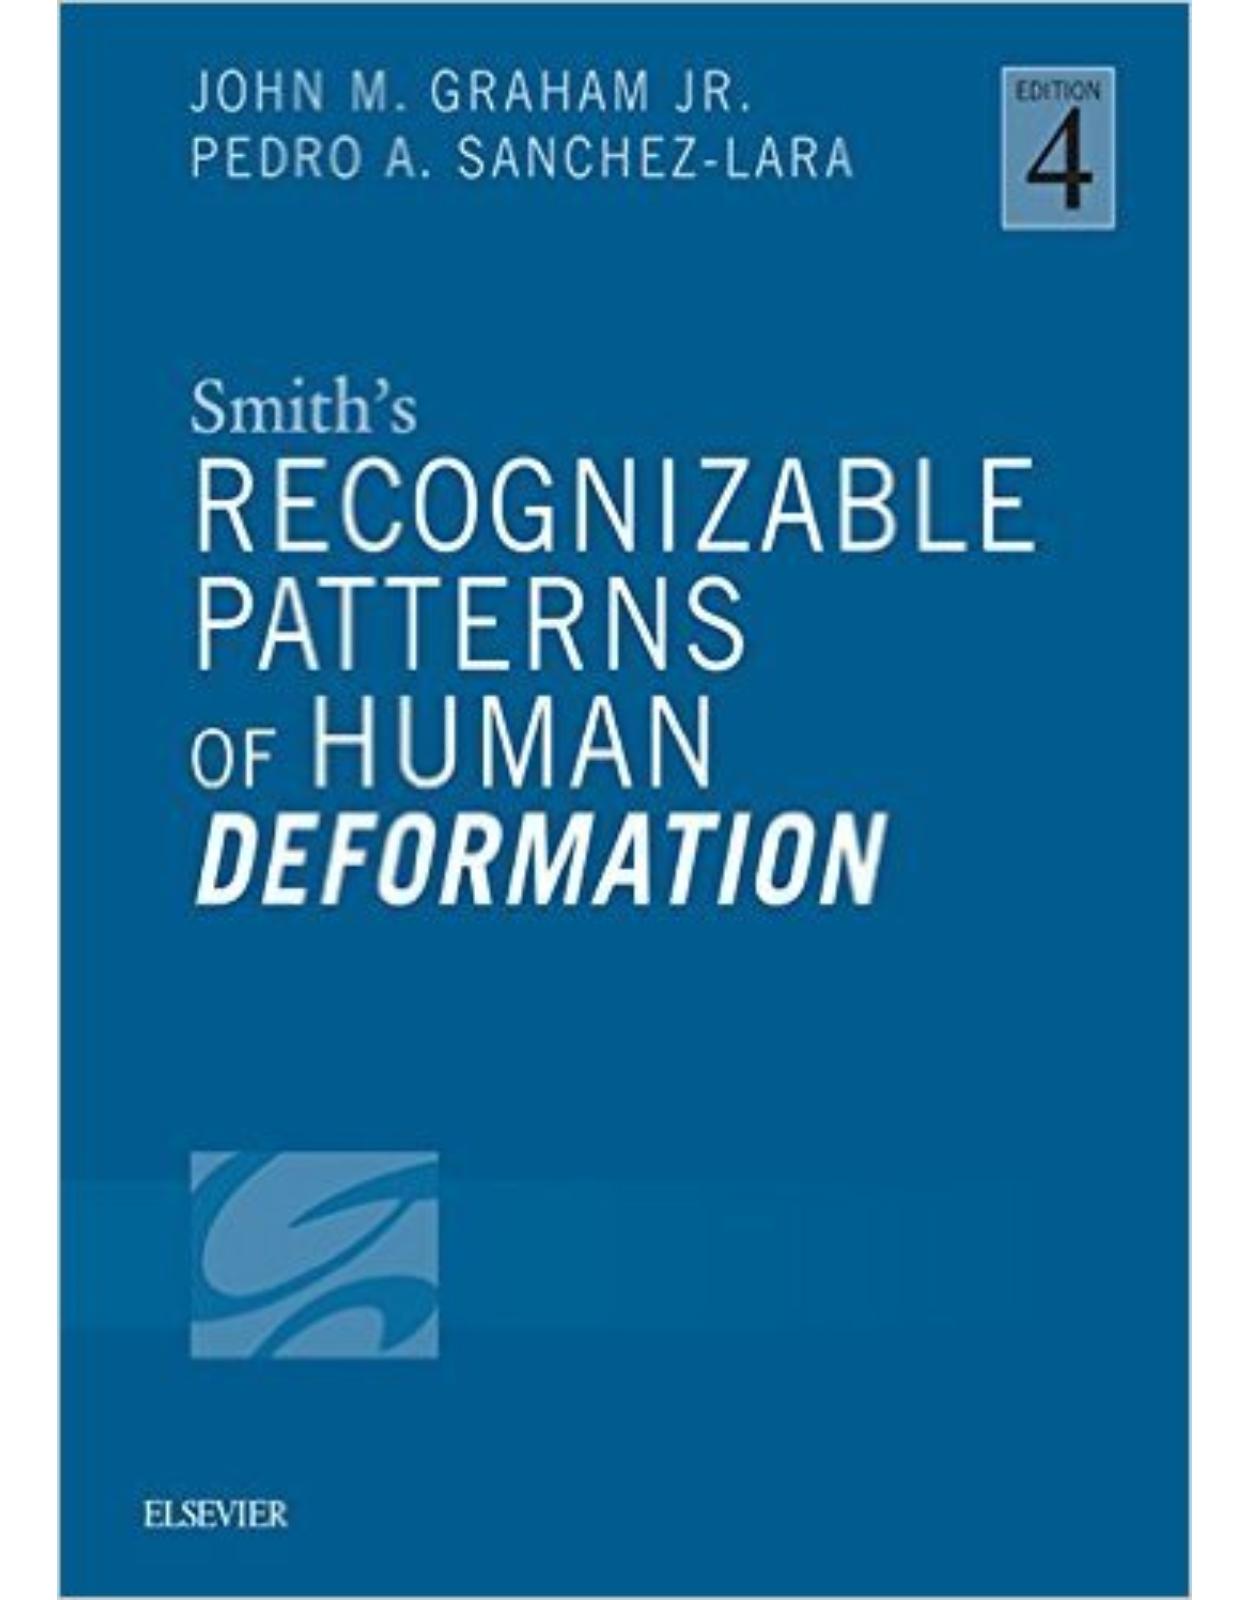 Smith’s Recognizable Patterns of Human Deformation, 4e